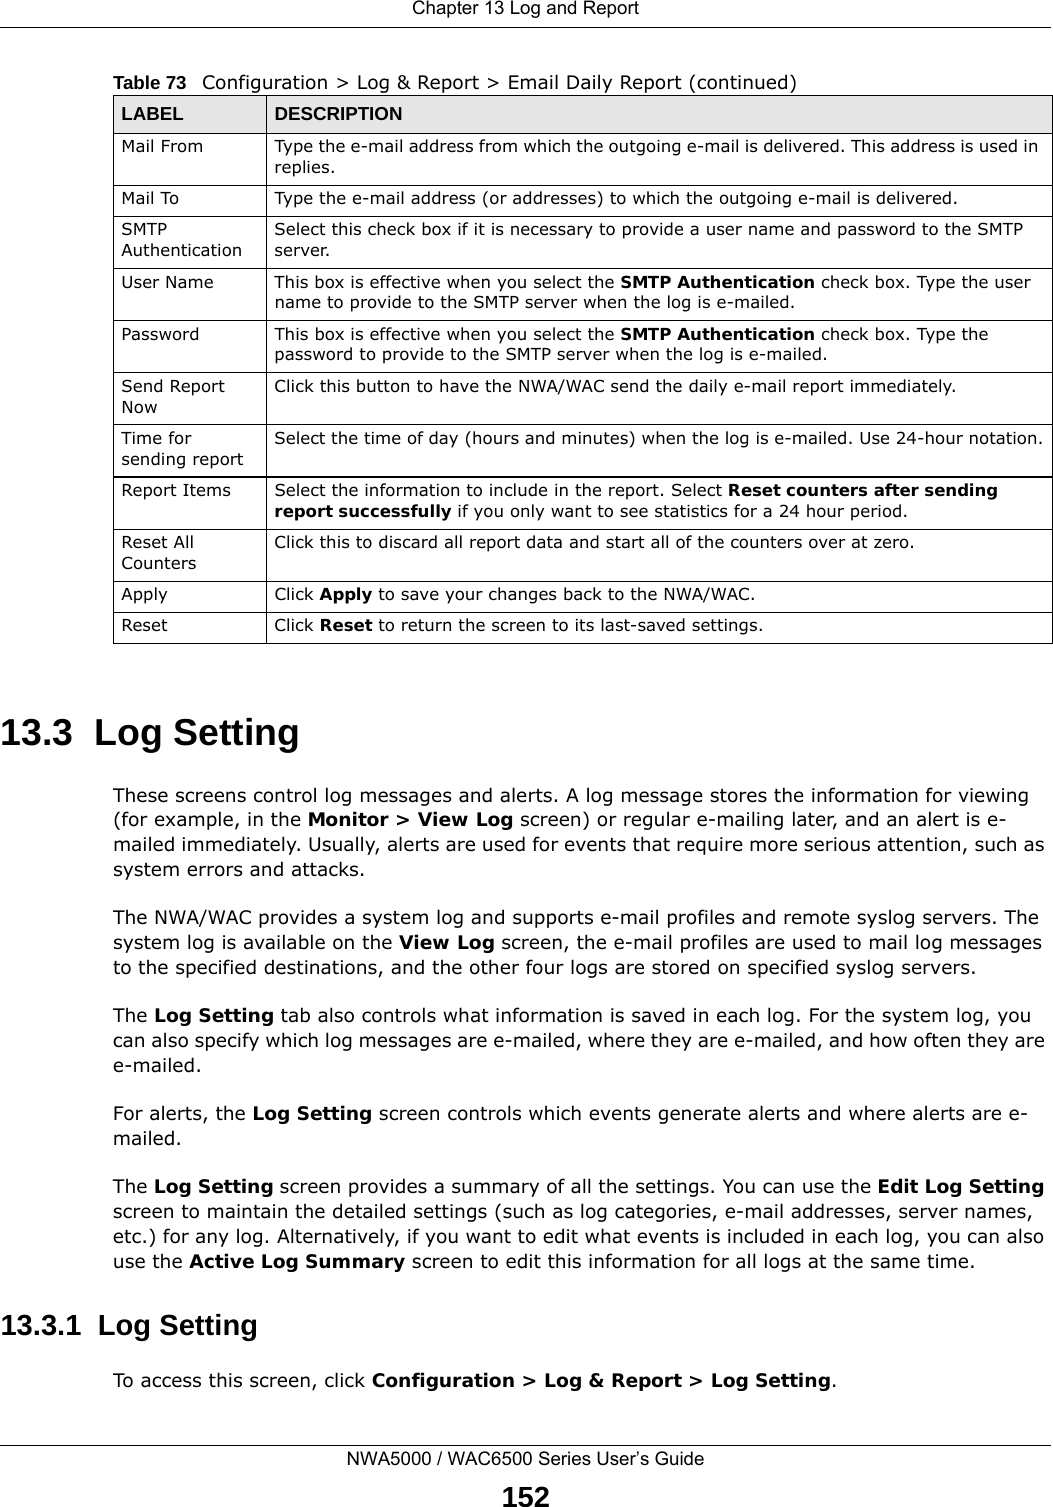 Chapter 13 Log and ReportNWA5000 / WAC6500 Series User’s Guide15213.3  Log Setting These screens control log messages and alerts. A log message stores the information for viewing (for example, in the Monitor &gt; View Log screen) or regular e-mailing later, and an alert is e-mailed immediately. Usually, alerts are used for events that require more serious attention, such as system errors and attacks.The NWA/WAC provides a system log and supports e-mail profiles and remote syslog servers. The system log is available on the View Log screen, the e-mail profiles are used to mail log messages to the specified destinations, and the other four logs are stored on specified syslog servers.The Log Setting tab also controls what information is saved in each log. For the system log, you can also specify which log messages are e-mailed, where they are e-mailed, and how often they are e-mailed.For alerts, the Log Setting screen controls which events generate alerts and where alerts are e-mailed.The Log Setting screen provides a summary of all the settings. You can use the Edit Log Setting screen to maintain the detailed settings (such as log categories, e-mail addresses, server names, etc.) for any log. Alternatively, if you want to edit what events is included in each log, you can also use the Active Log Summary screen to edit this information for all logs at the same time.13.3.1  Log SettingTo access this screen, click Configuration &gt; Log &amp; Report &gt; Log Setting.Mail From Type the e-mail address from which the outgoing e-mail is delivered. This address is used in replies.Mail To Type the e-mail address (or addresses) to which the outgoing e-mail is delivered.SMTP AuthenticationSelect this check box if it is necessary to provide a user name and password to the SMTP server.User Name This box is effective when you select the SMTP Authentication check box. Type the user name to provide to the SMTP server when the log is e-mailed.Password This box is effective when you select the SMTP Authentication check box. Type the password to provide to the SMTP server when the log is e-mailed.Send Report NowClick this button to have the NWA/WAC send the daily e-mail report immediately.Time for sending reportSelect the time of day (hours and minutes) when the log is e-mailed. Use 24-hour notation.Report Items Select the information to include in the report. Select Reset counters after sending report successfully if you only want to see statistics for a 24 hour period.Reset All CountersClick this to discard all report data and start all of the counters over at zero. Apply Click Apply to save your changes back to the NWA/WAC.Reset Click Reset to return the screen to its last-saved settings. Table 73   Configuration &gt; Log &amp; Report &gt; Email Daily Report (continued)LABEL DESCRIPTION